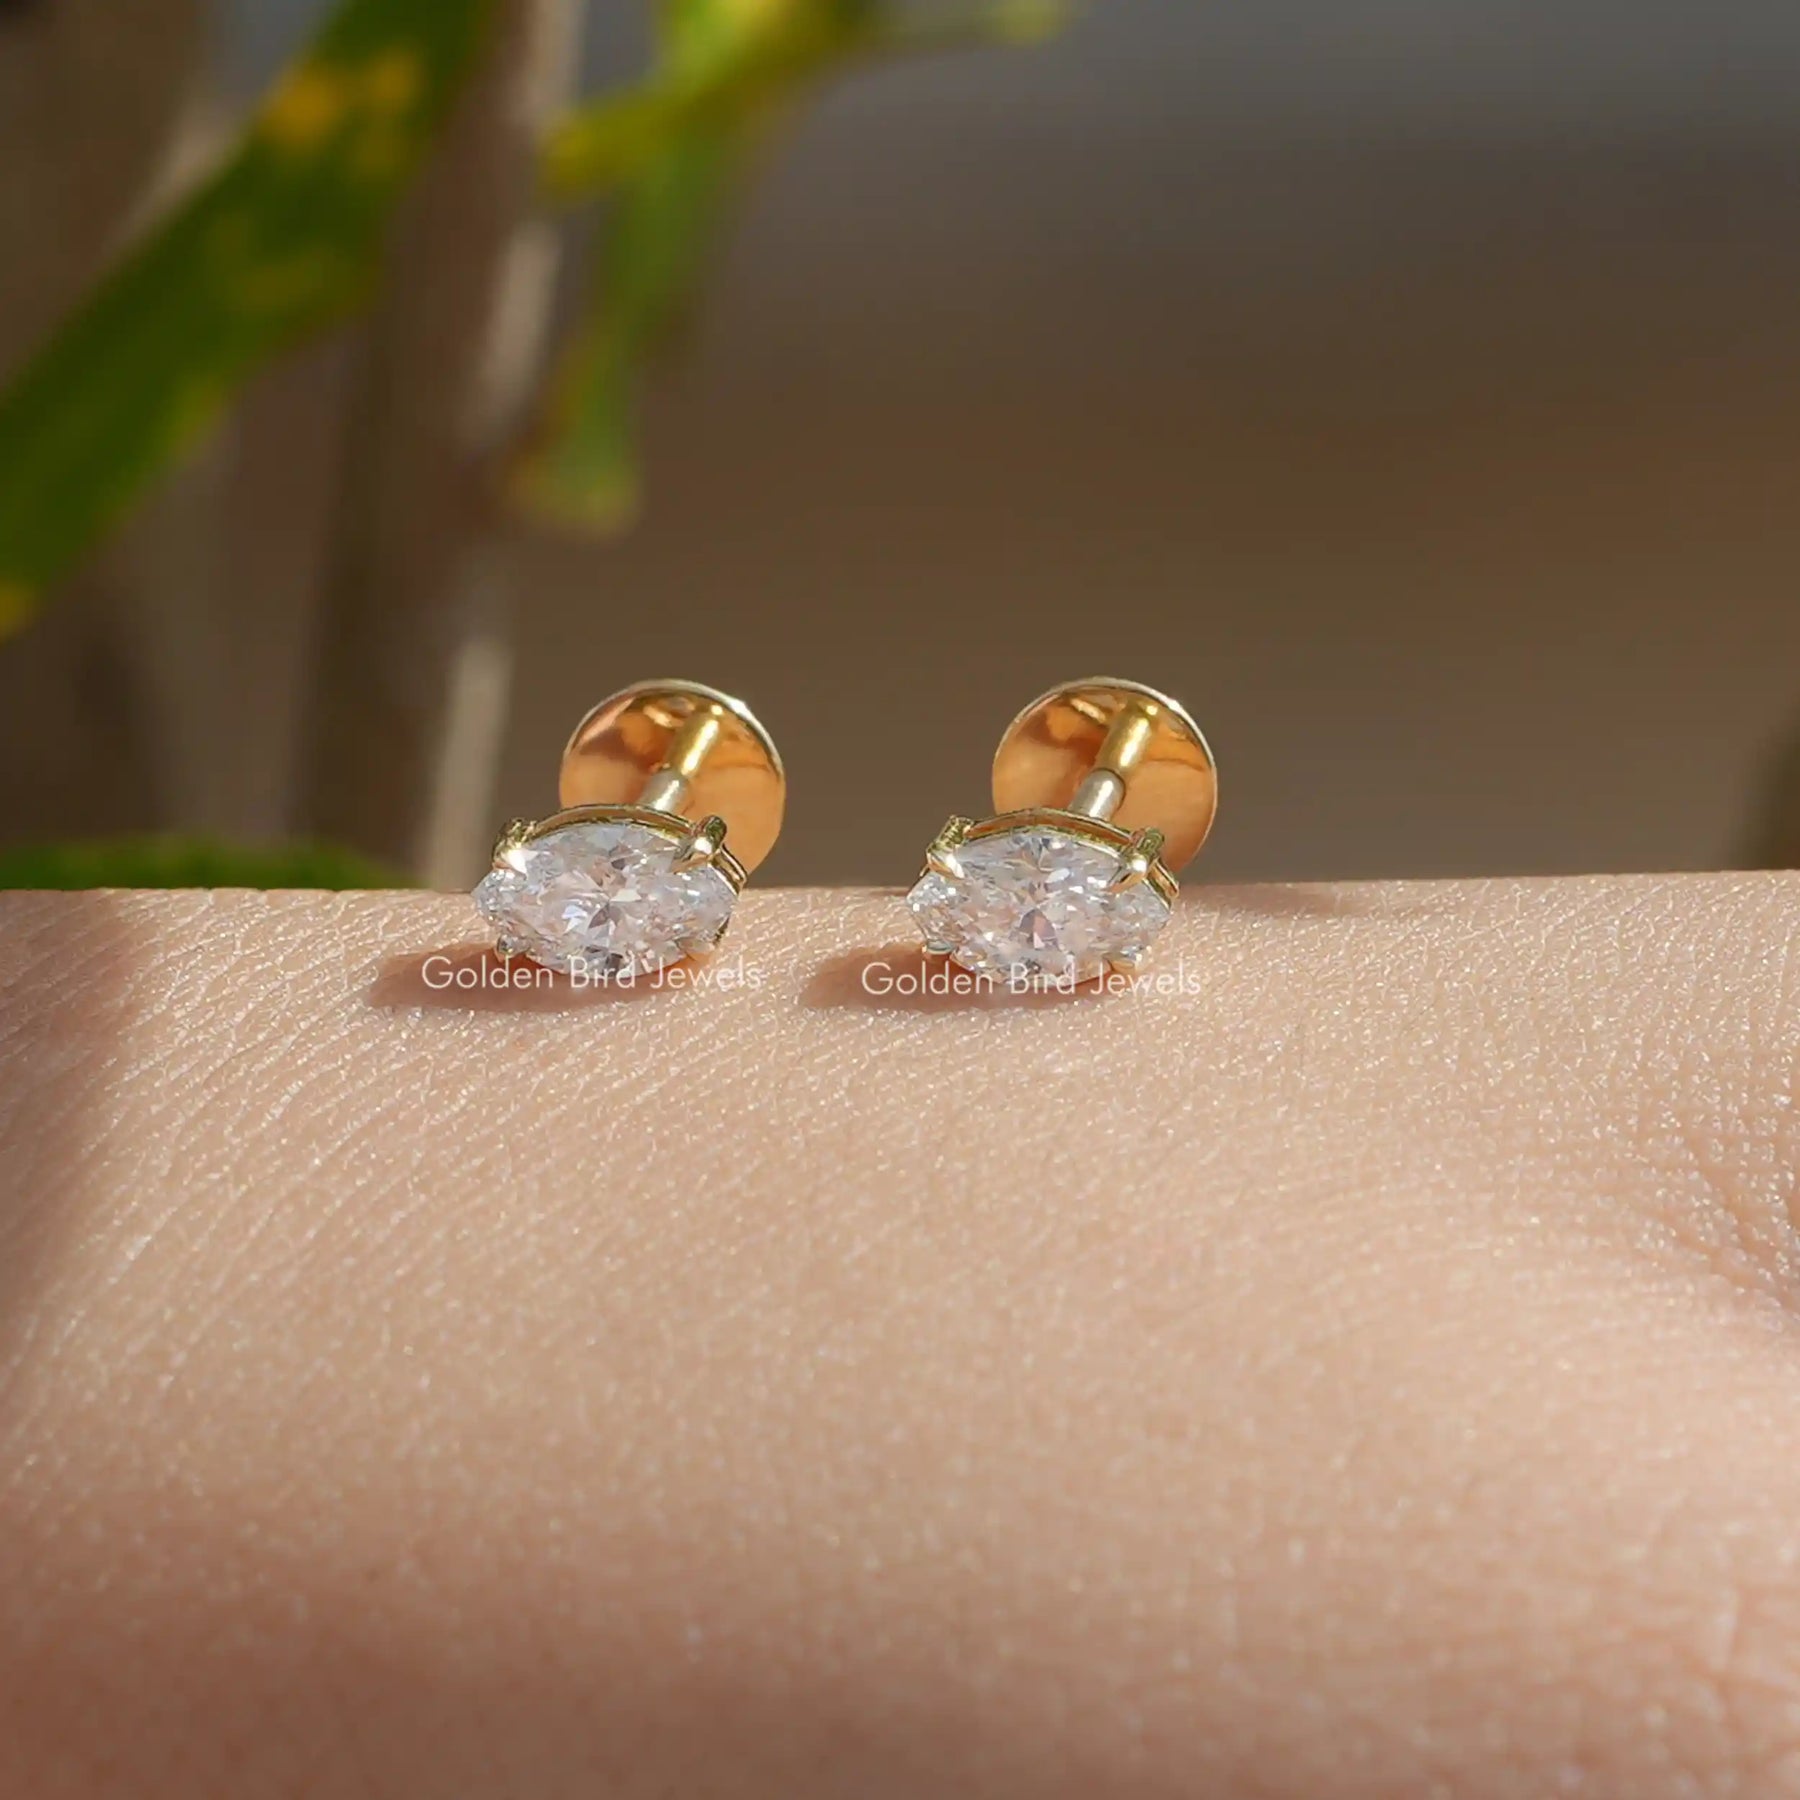 [Lab grown diamond marquise cut stud earrings made of yellow gold]-[Golden Bird Jewels]